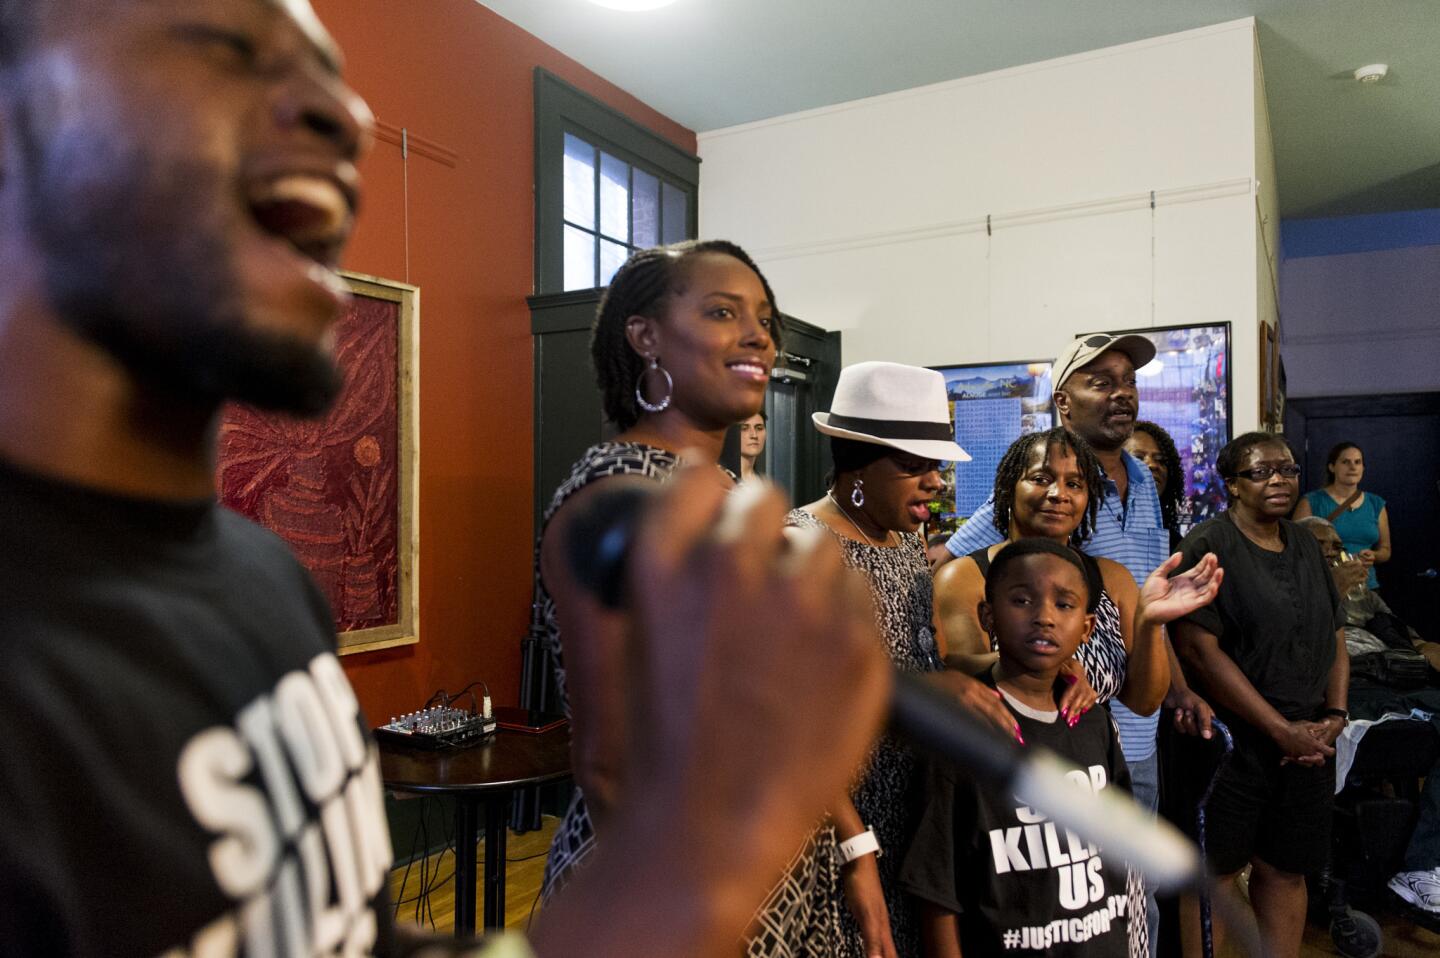 Jamal Cash leads Jai "Jerry" Williams' family and community in song at Williams' birthday party at the Block off Biltmore in Asheville, N.C., on July 12. Williams, who was fatally shot by police 10 days earlier, would have been 36.